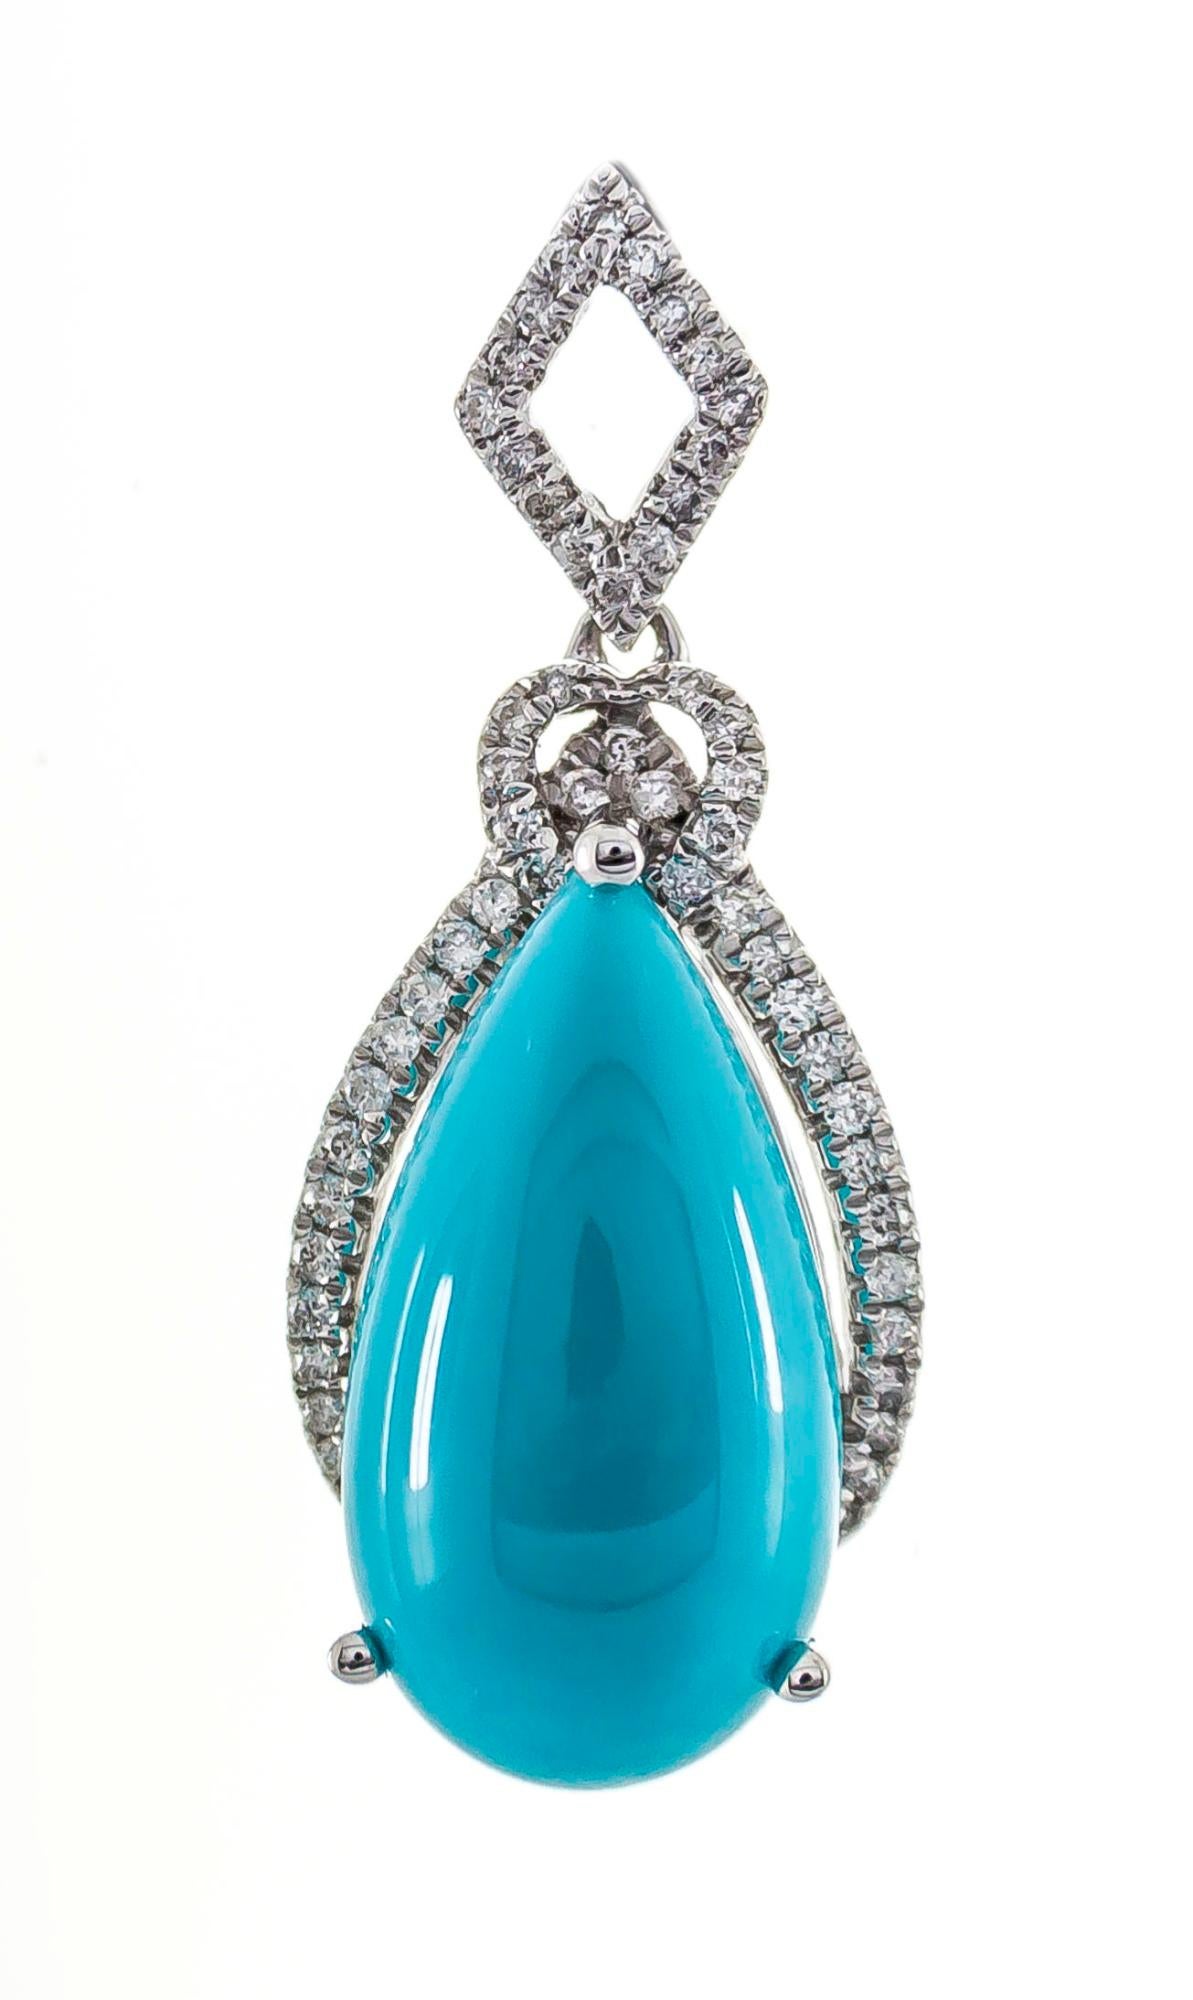 Decorate yourself in elegance with this Pendant is crafted from 14-karat White Gold by Gin & Grace. This Pendant is made up of Pear-cab Turquoise (1 pcs) 6.78 carat and Round-cut White Diamond (53 Pcs) 0.18 Carat. This Pendant is weight 1.90 grams.